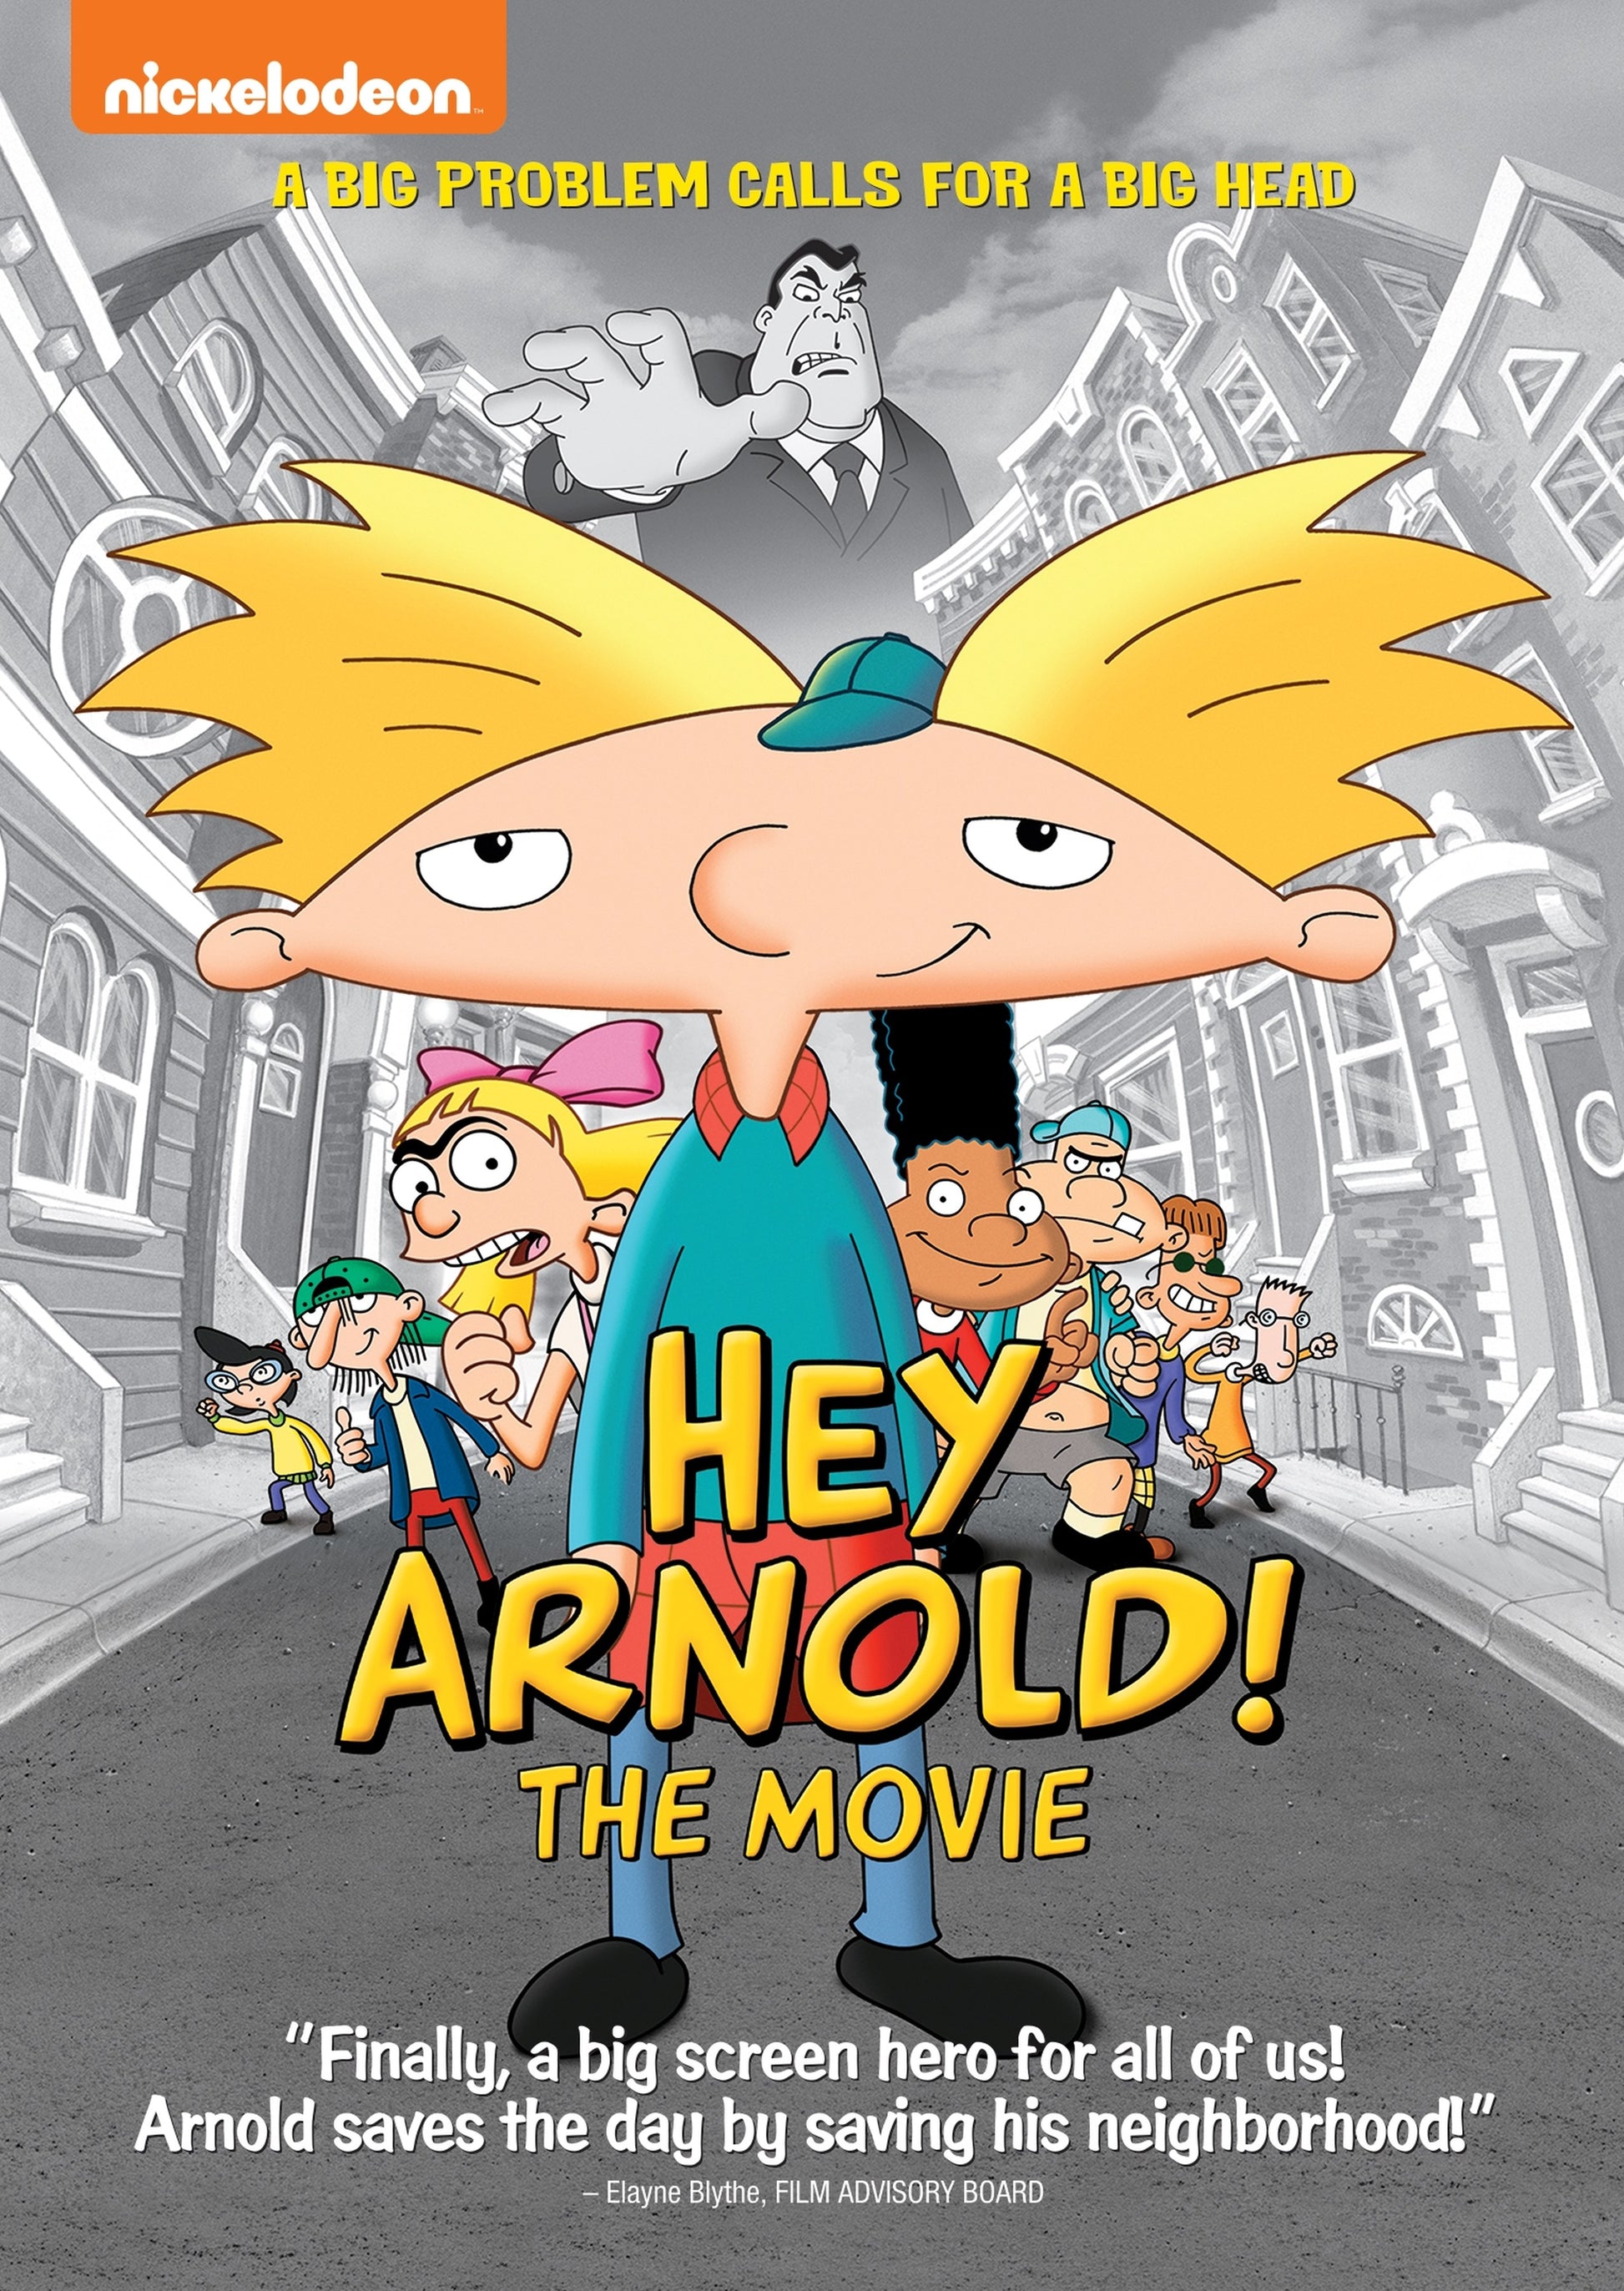 Hey Arnold! The Movie cover art